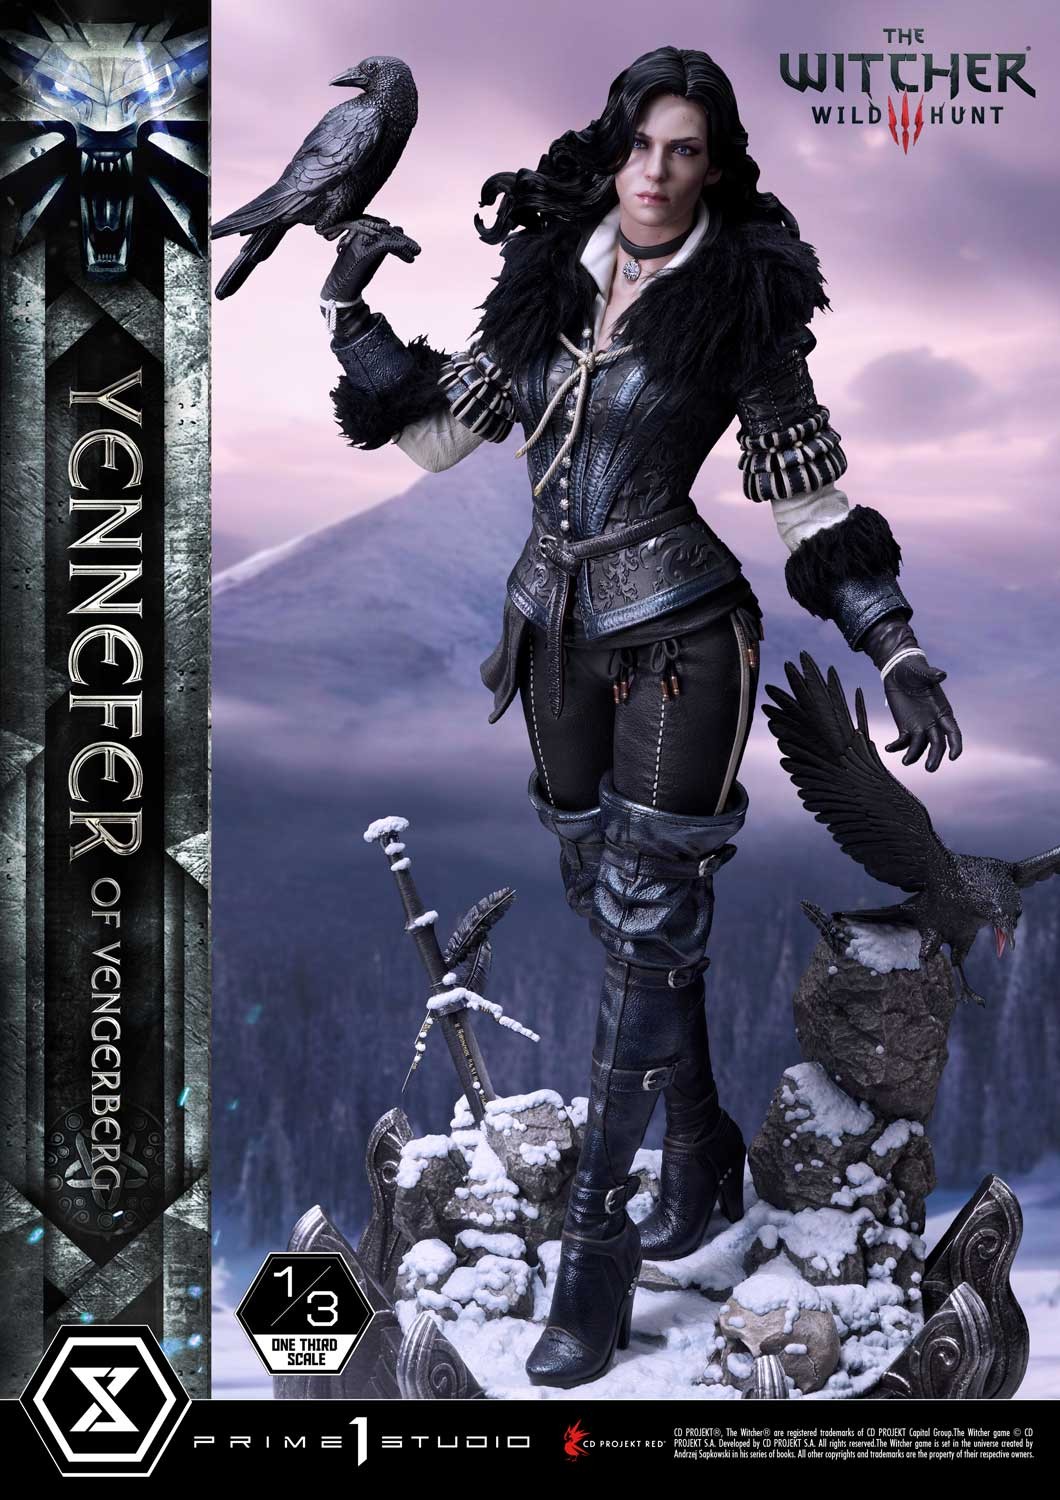 The Witcher 3: Wild Hunt Museum Masterline Yennefer of Vengerberg (Deluxe  Ver.) 1/3 Scale Statue